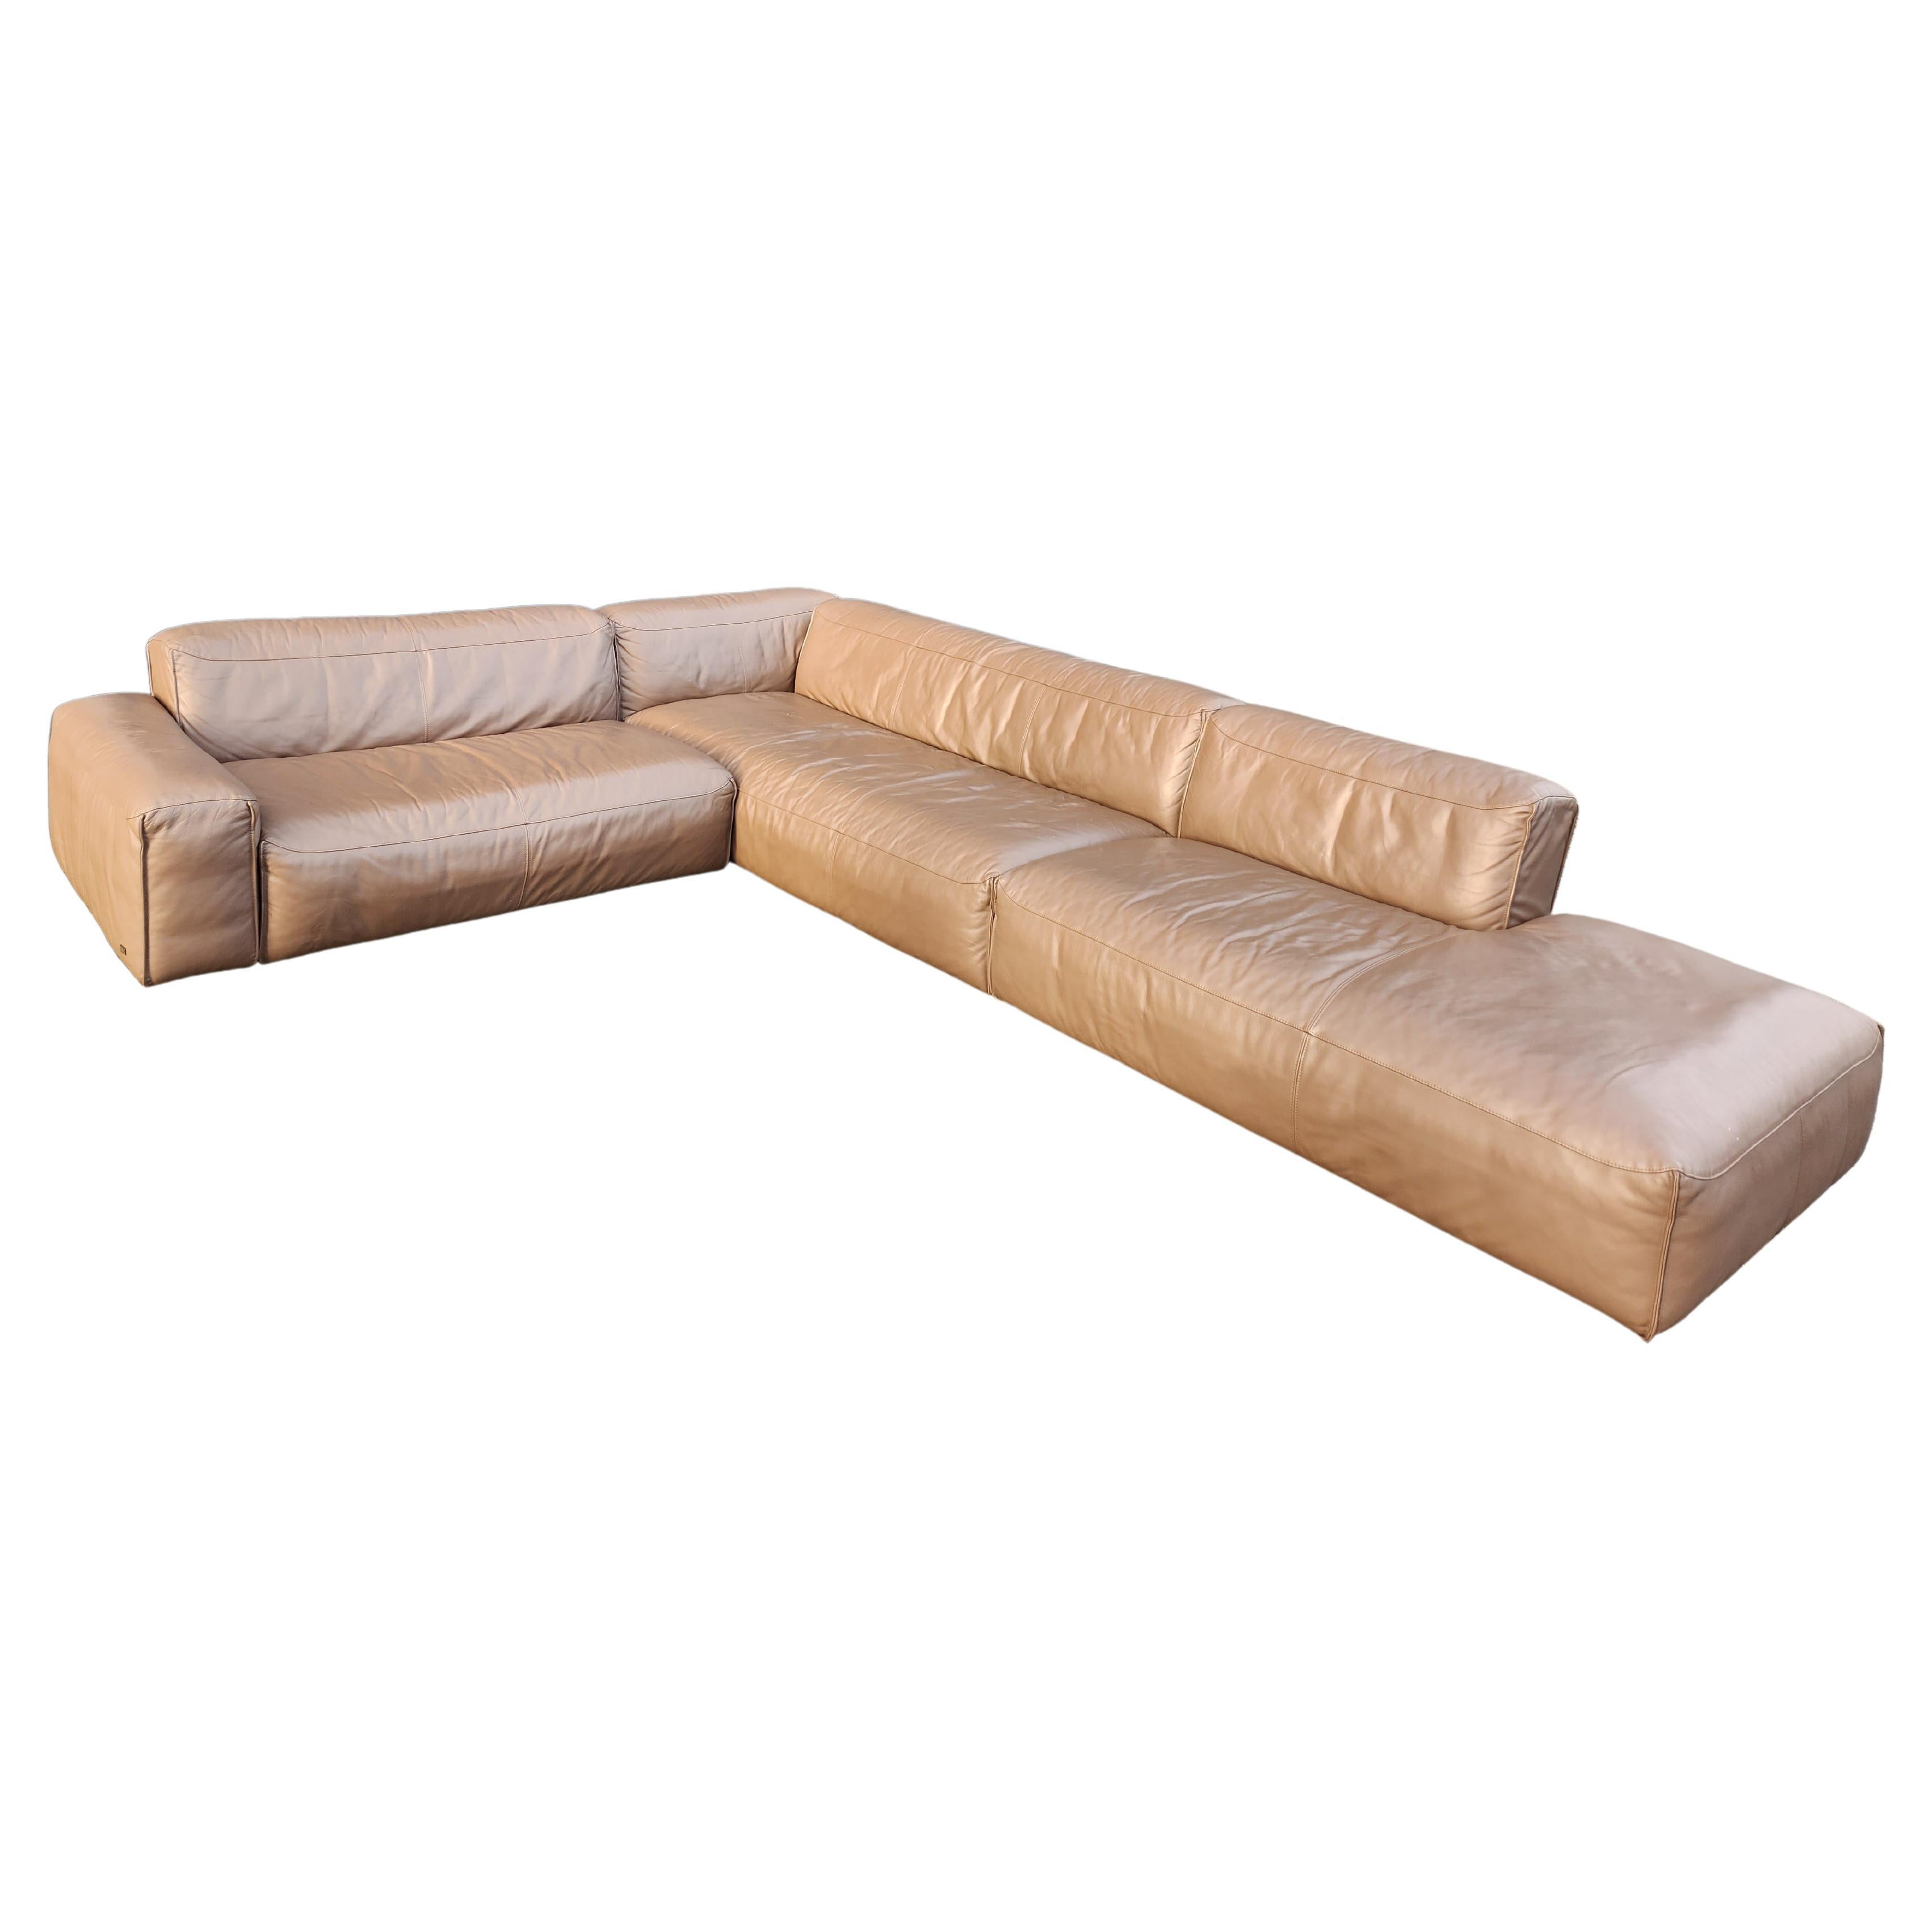 Rolf benz Mio sofa - lounge sofa in leather For Sale